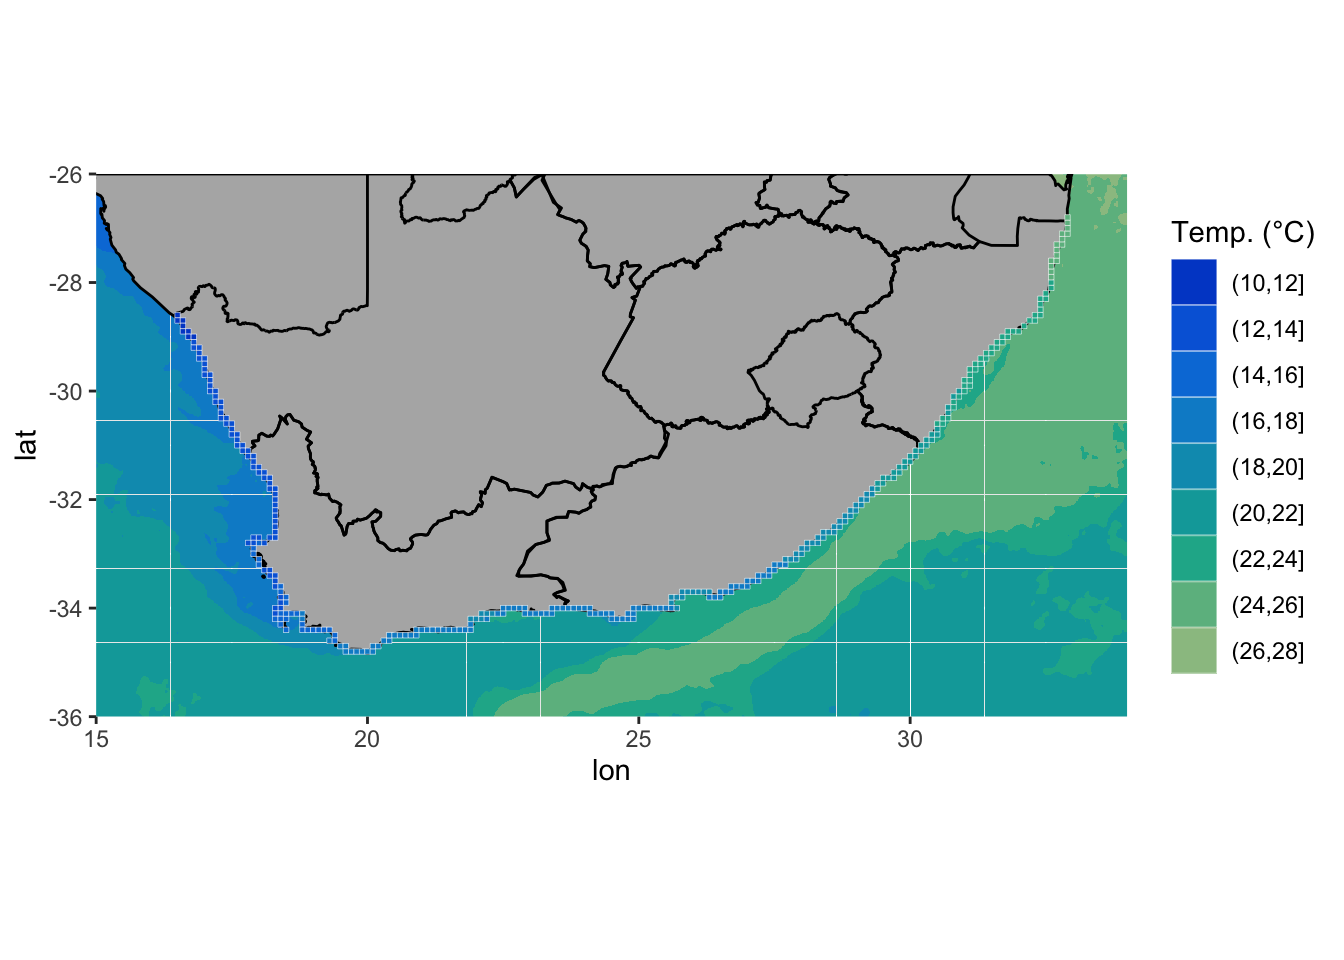 Map of South Africa showing *in situ* temeperatures (°C) as pixels along the coast.